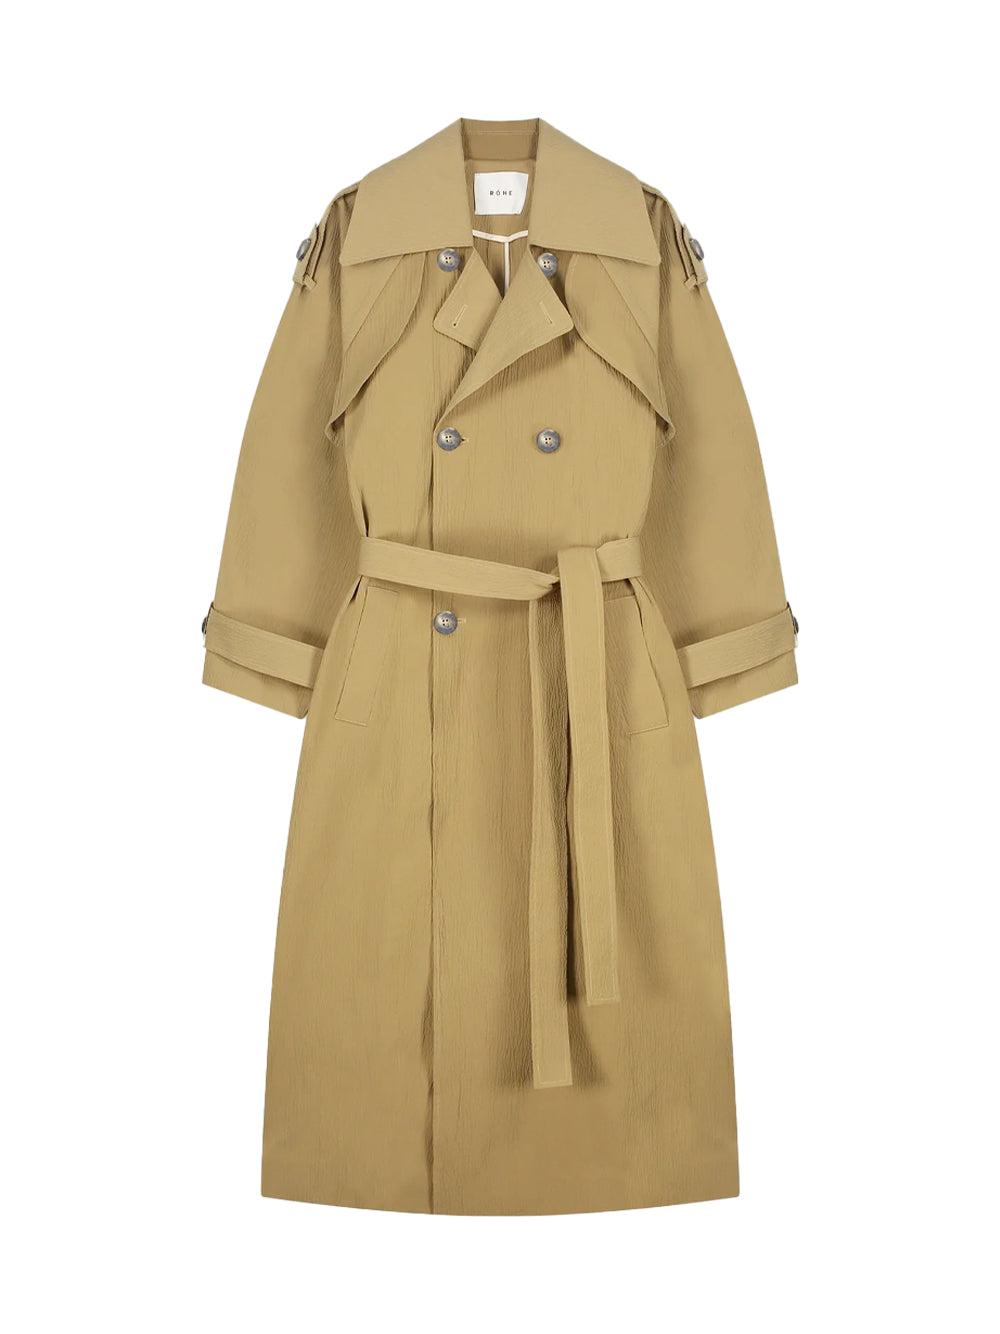 Rohe Textured Trench Coat in Natural | Lyst